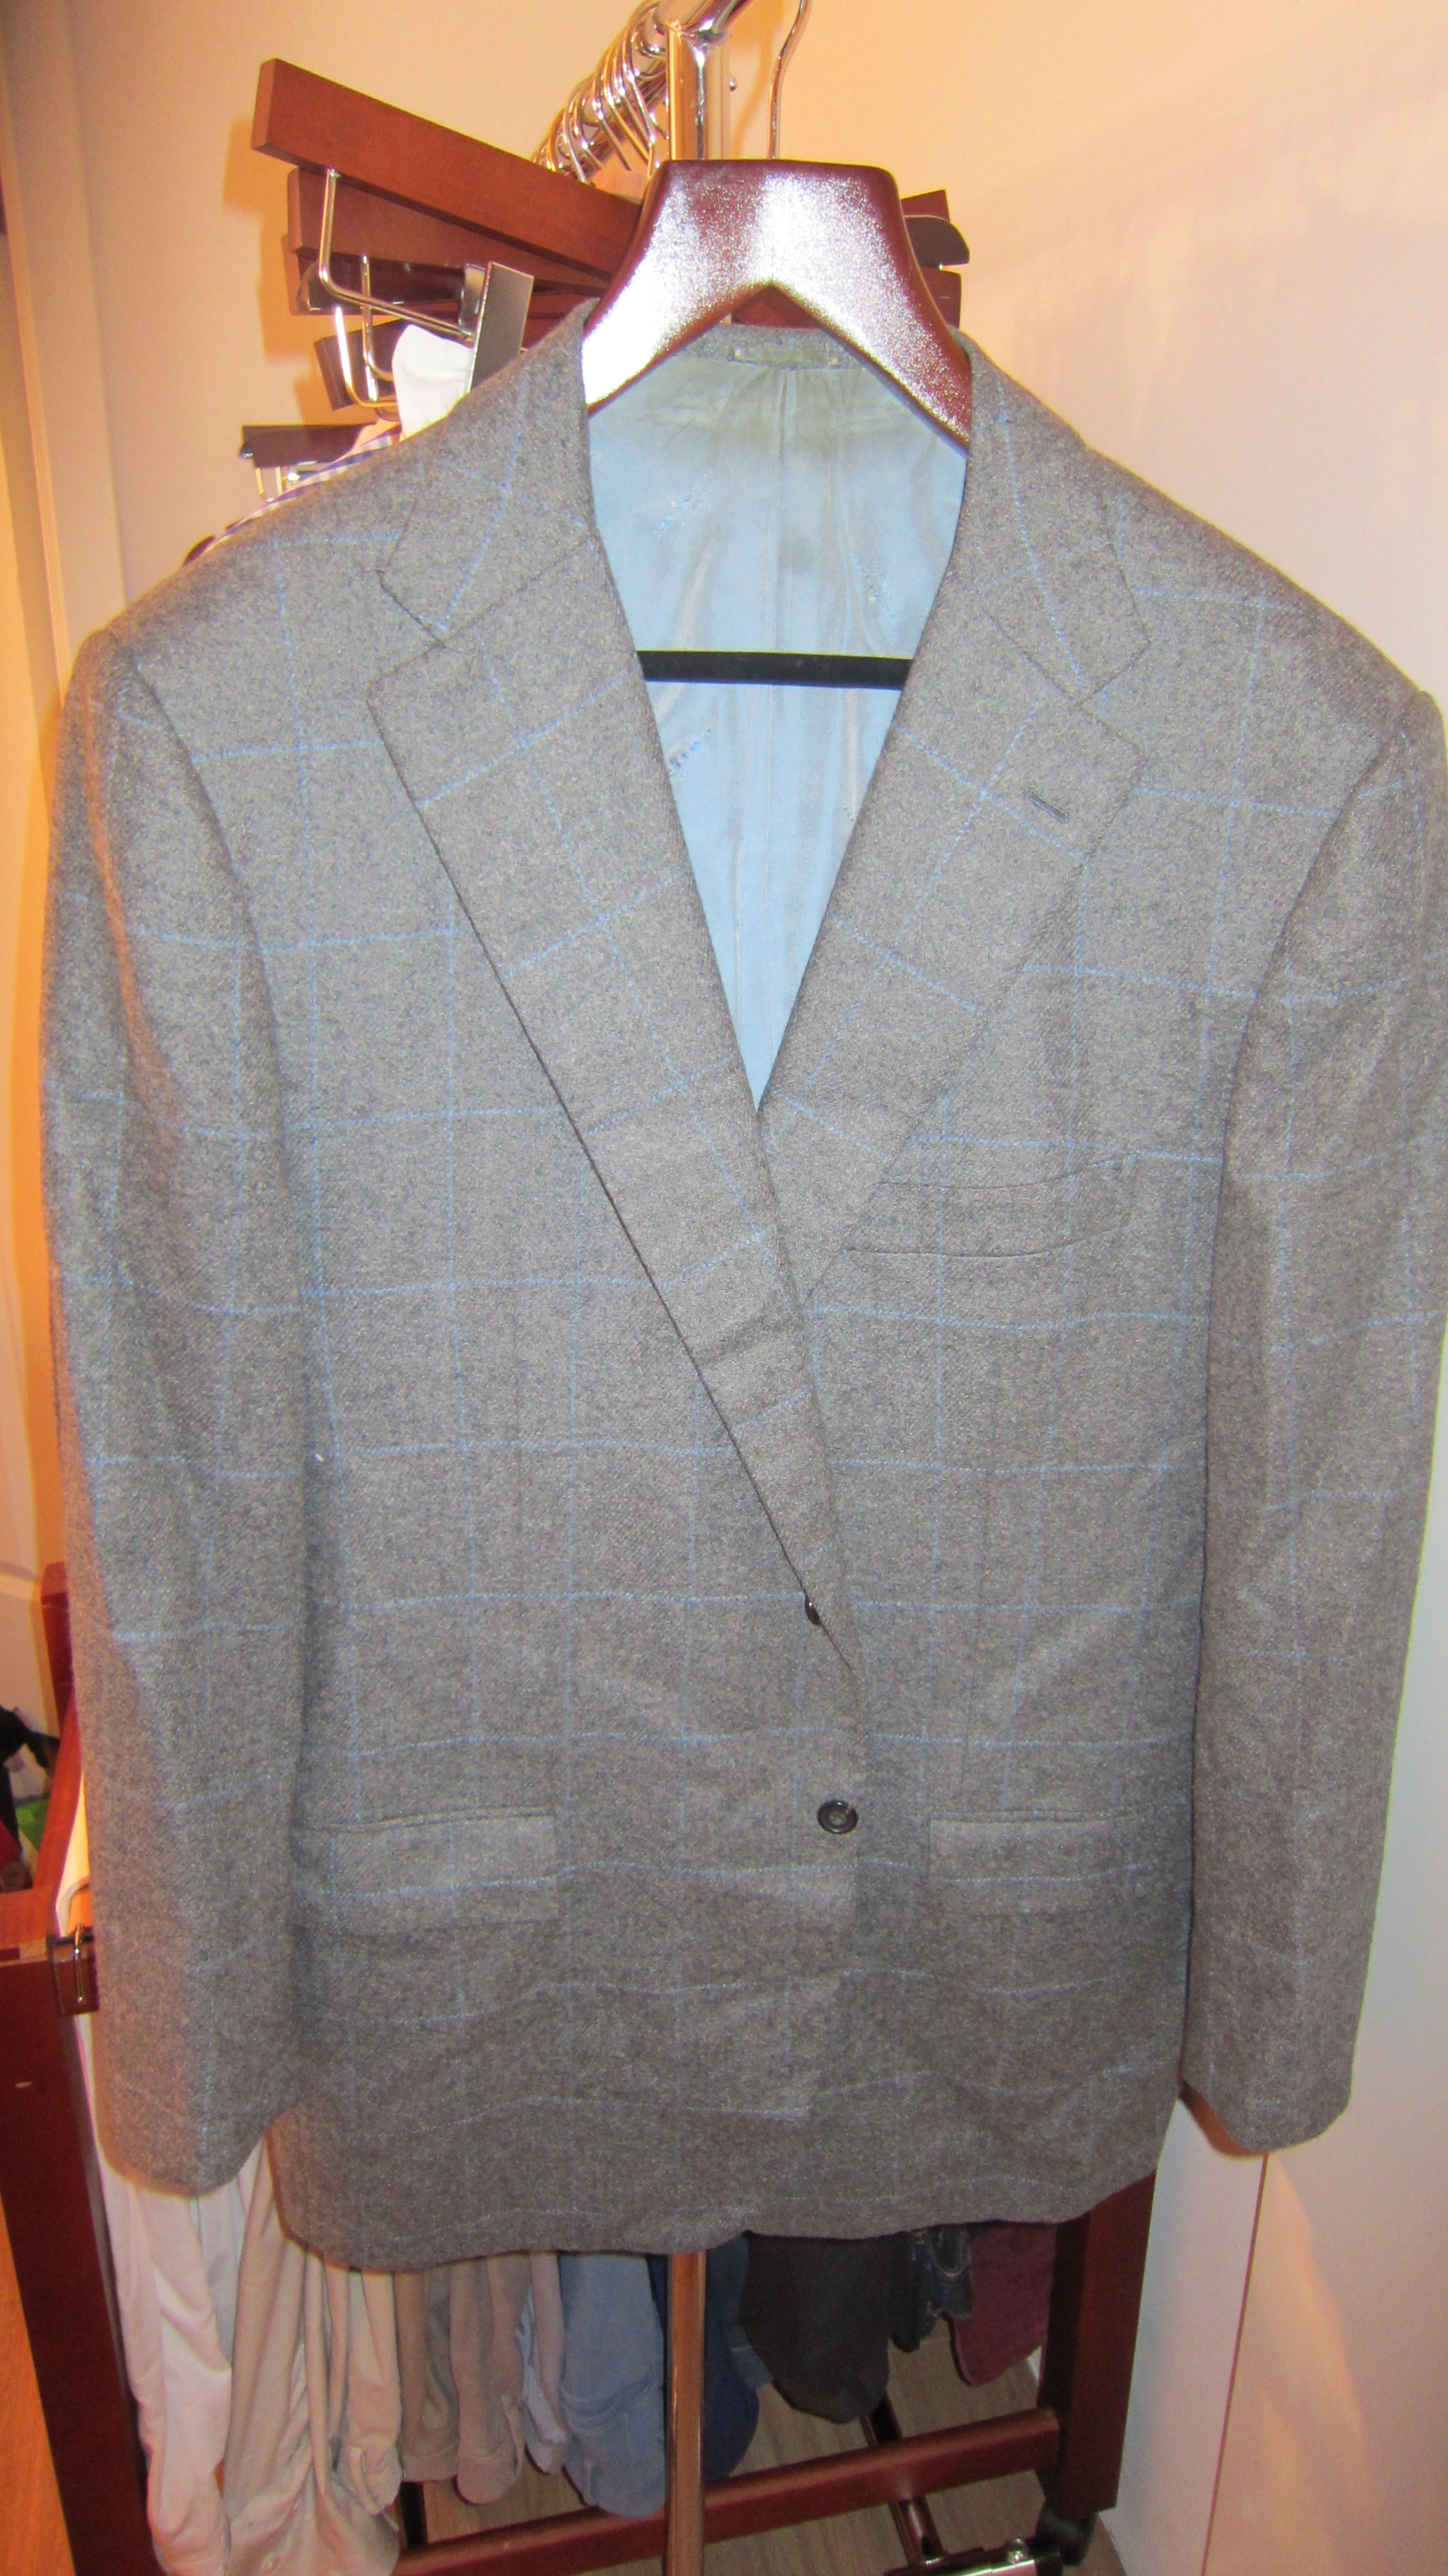 Kiton & Brioni Size 48 (US) CASHMERE SPORTSCOATS & ESCORIAL WOOL SUIT ...